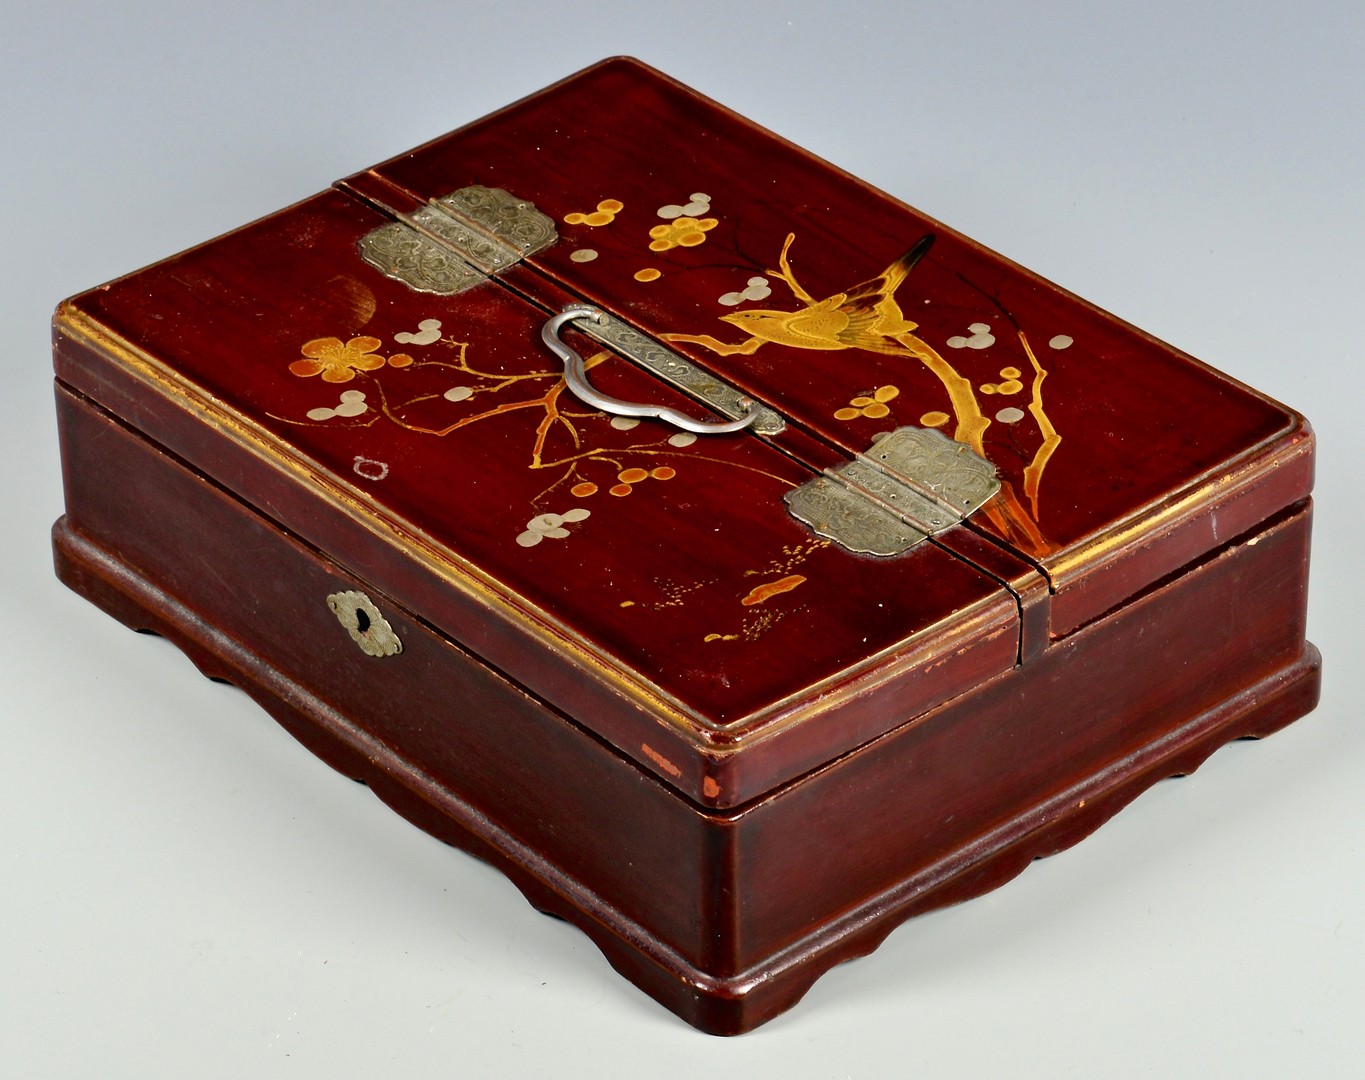 Lot 757: 3 Asian Lacquered Boxes